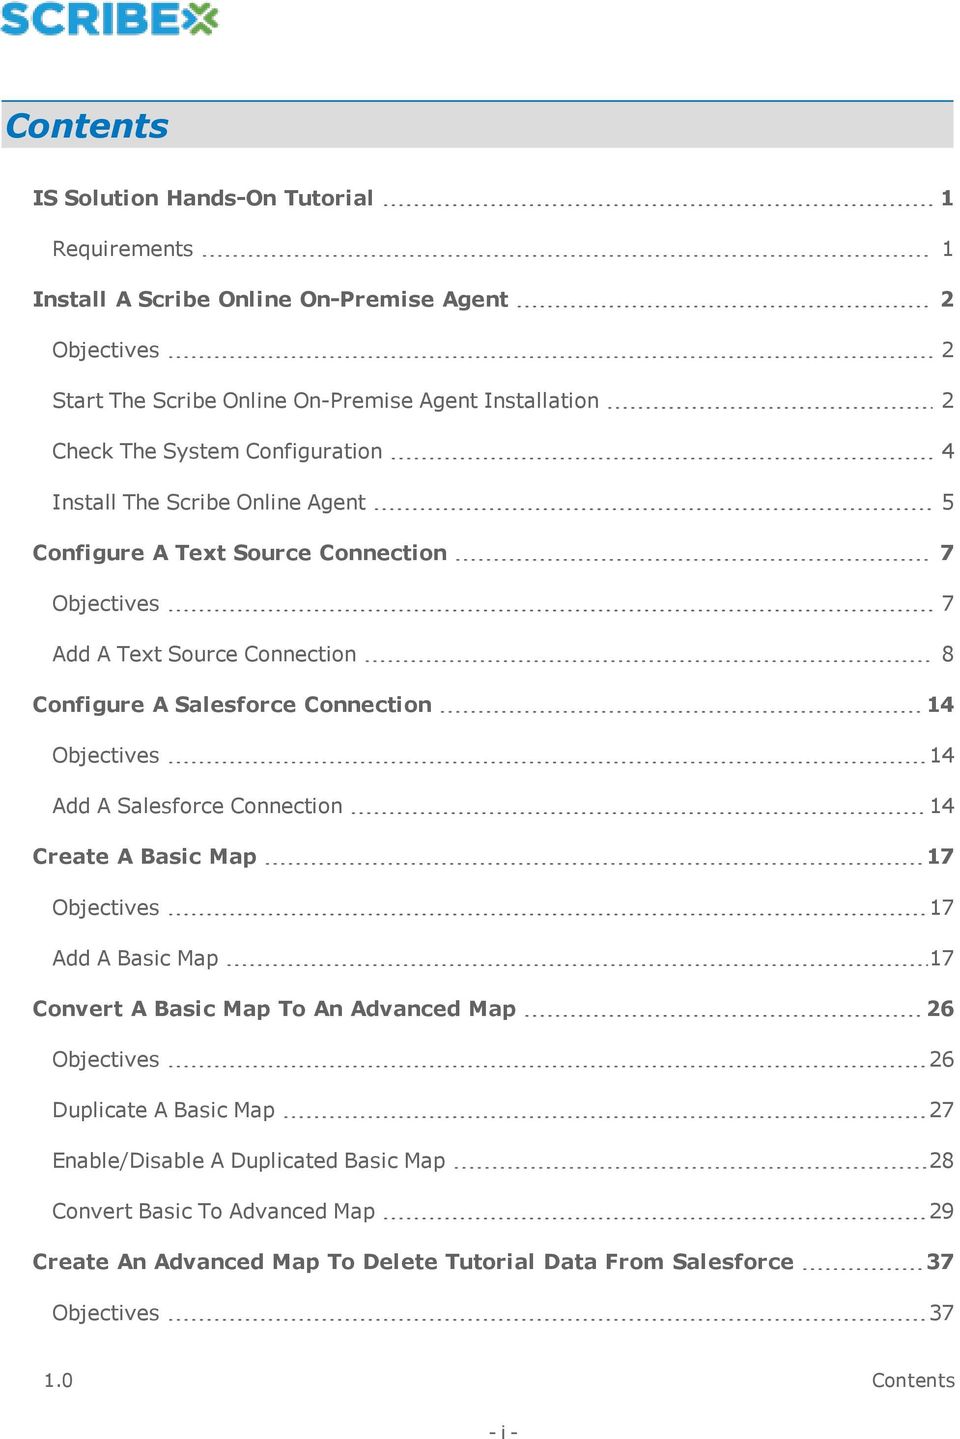 14 Objectives 14 Add A Salesforce Connection 14 Create A Basic Map 17 Objectives 17 Add A Basic Map 17 Convert A Basic Map To An Advanced Map 26 Objectives 26 Duplicate A Basic